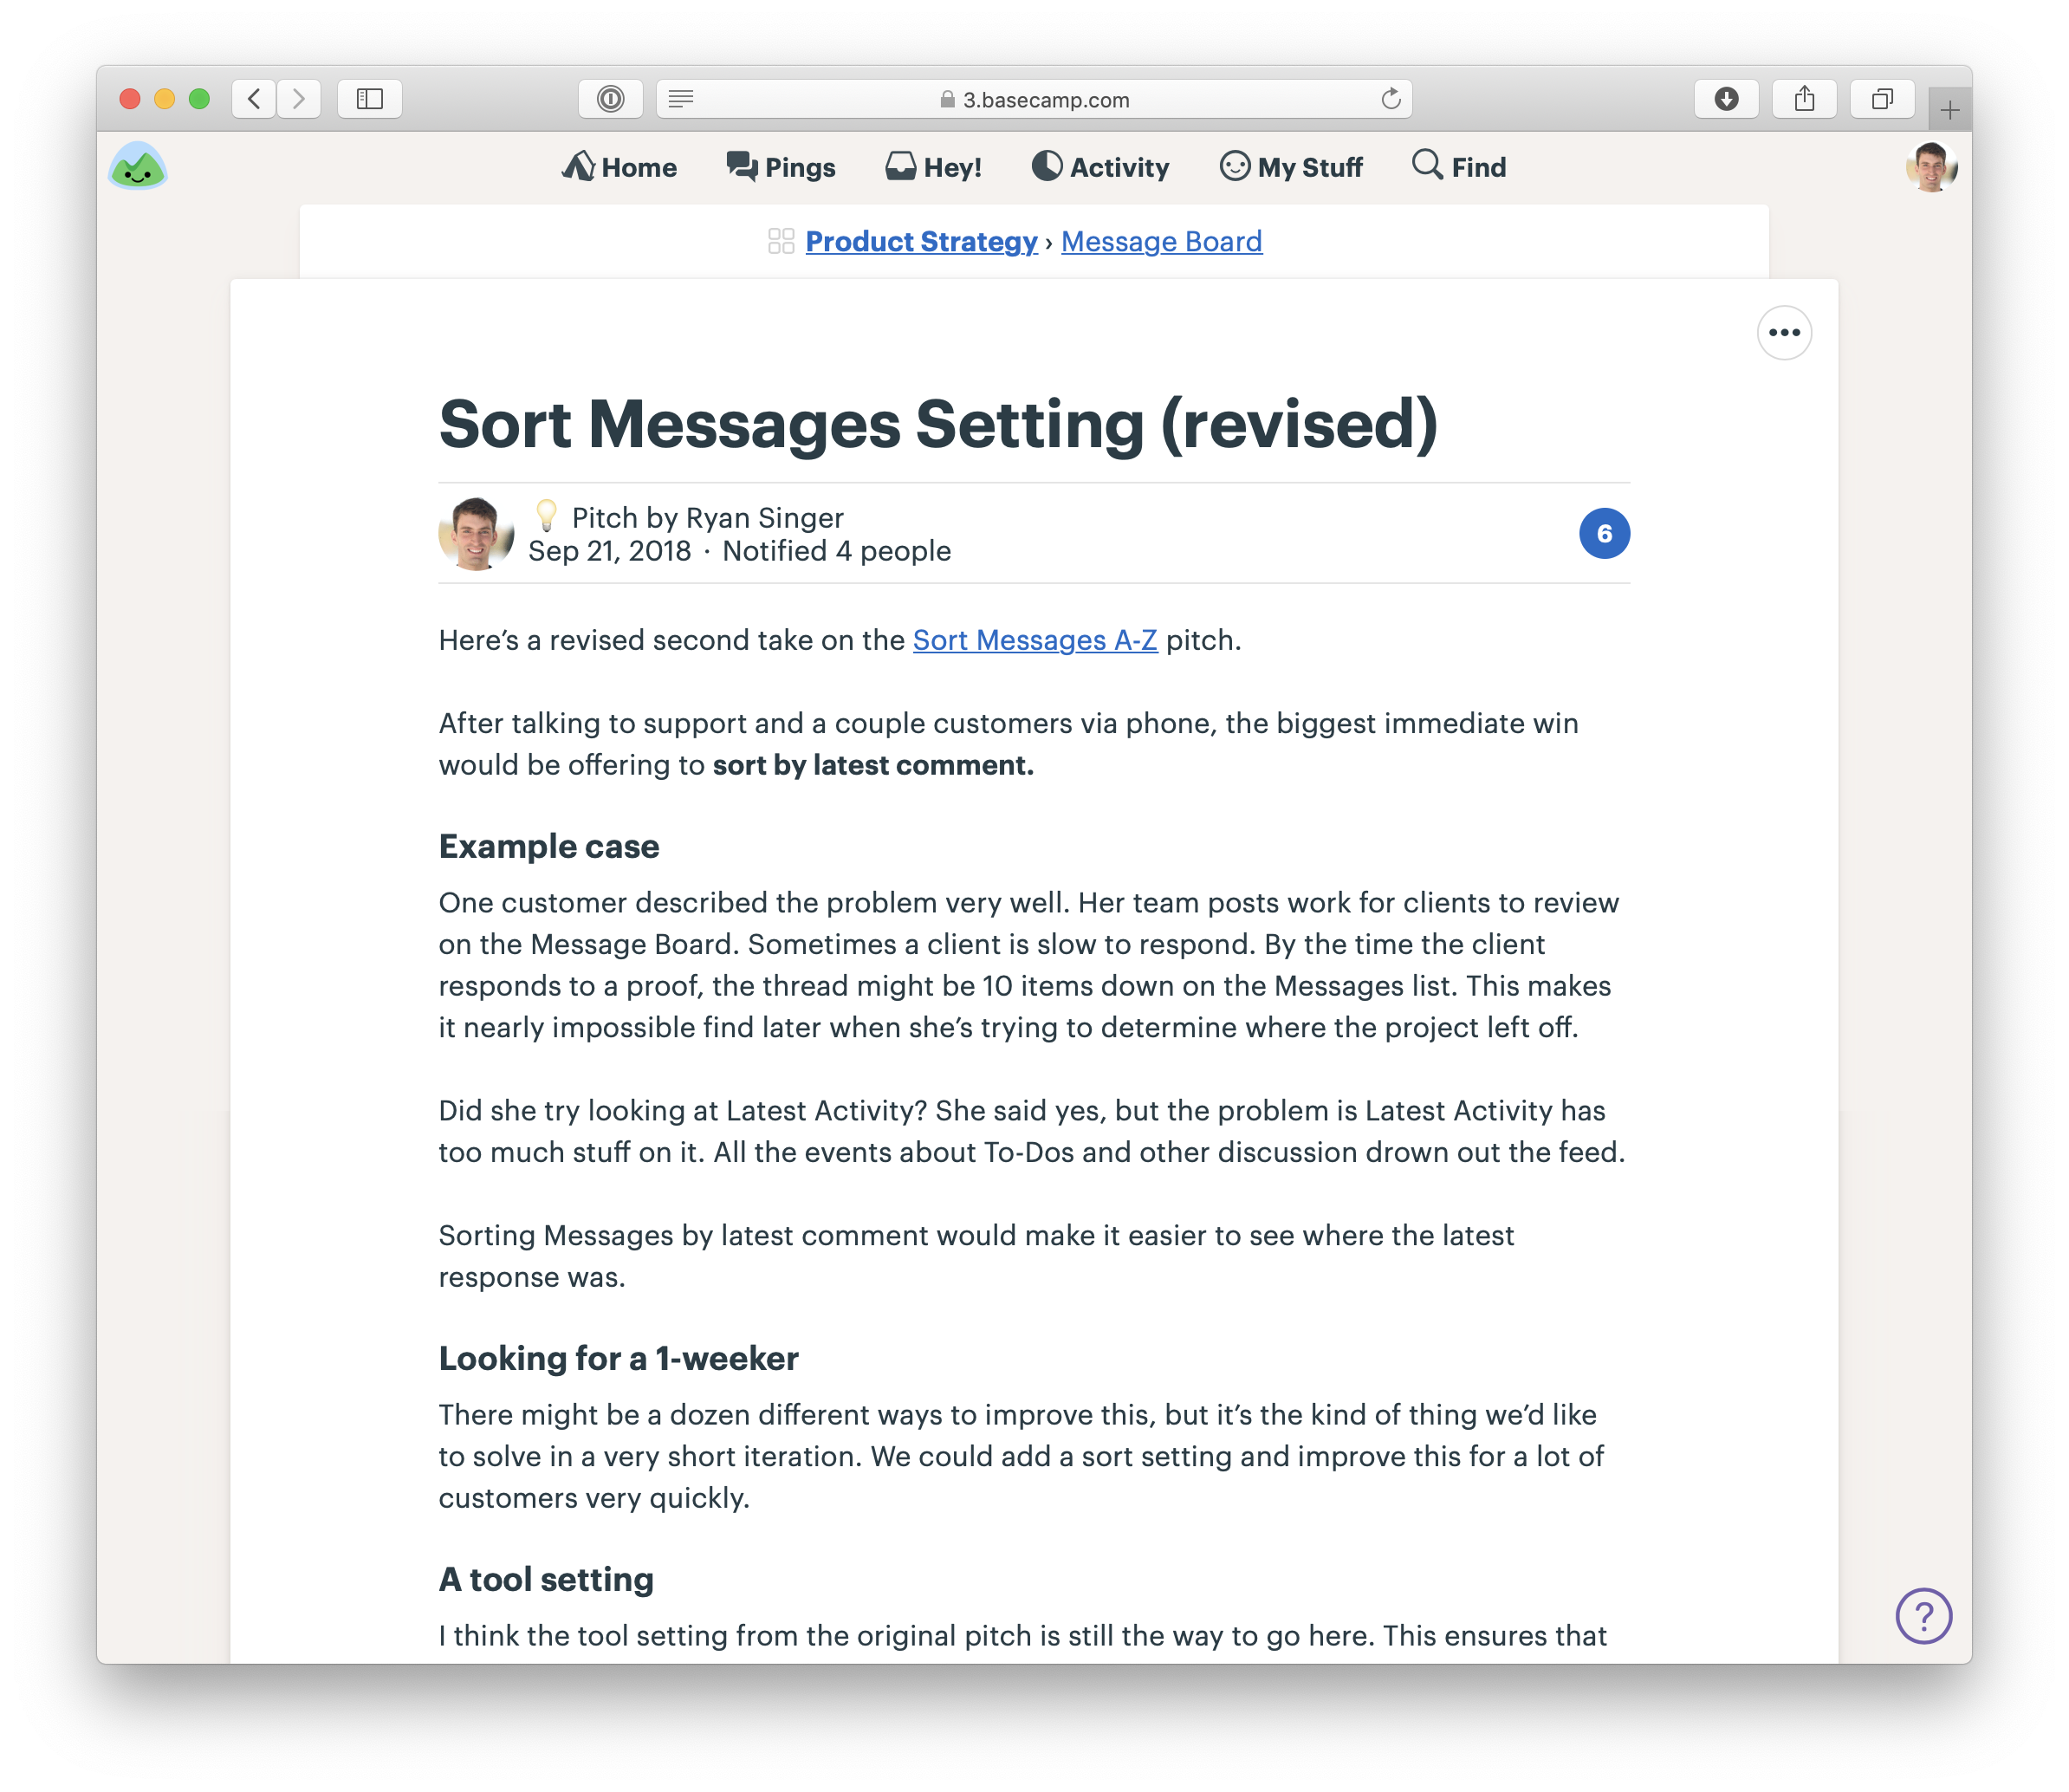 A screenshot of a Pitch posted as a Message in Basecamp. It is titled: Sort Messages Setting (Revised). It looks like a document. The first part of the pitch describes an example customer case. The second section is titled 'Looking for a 1-weeker' and describes the appetite.